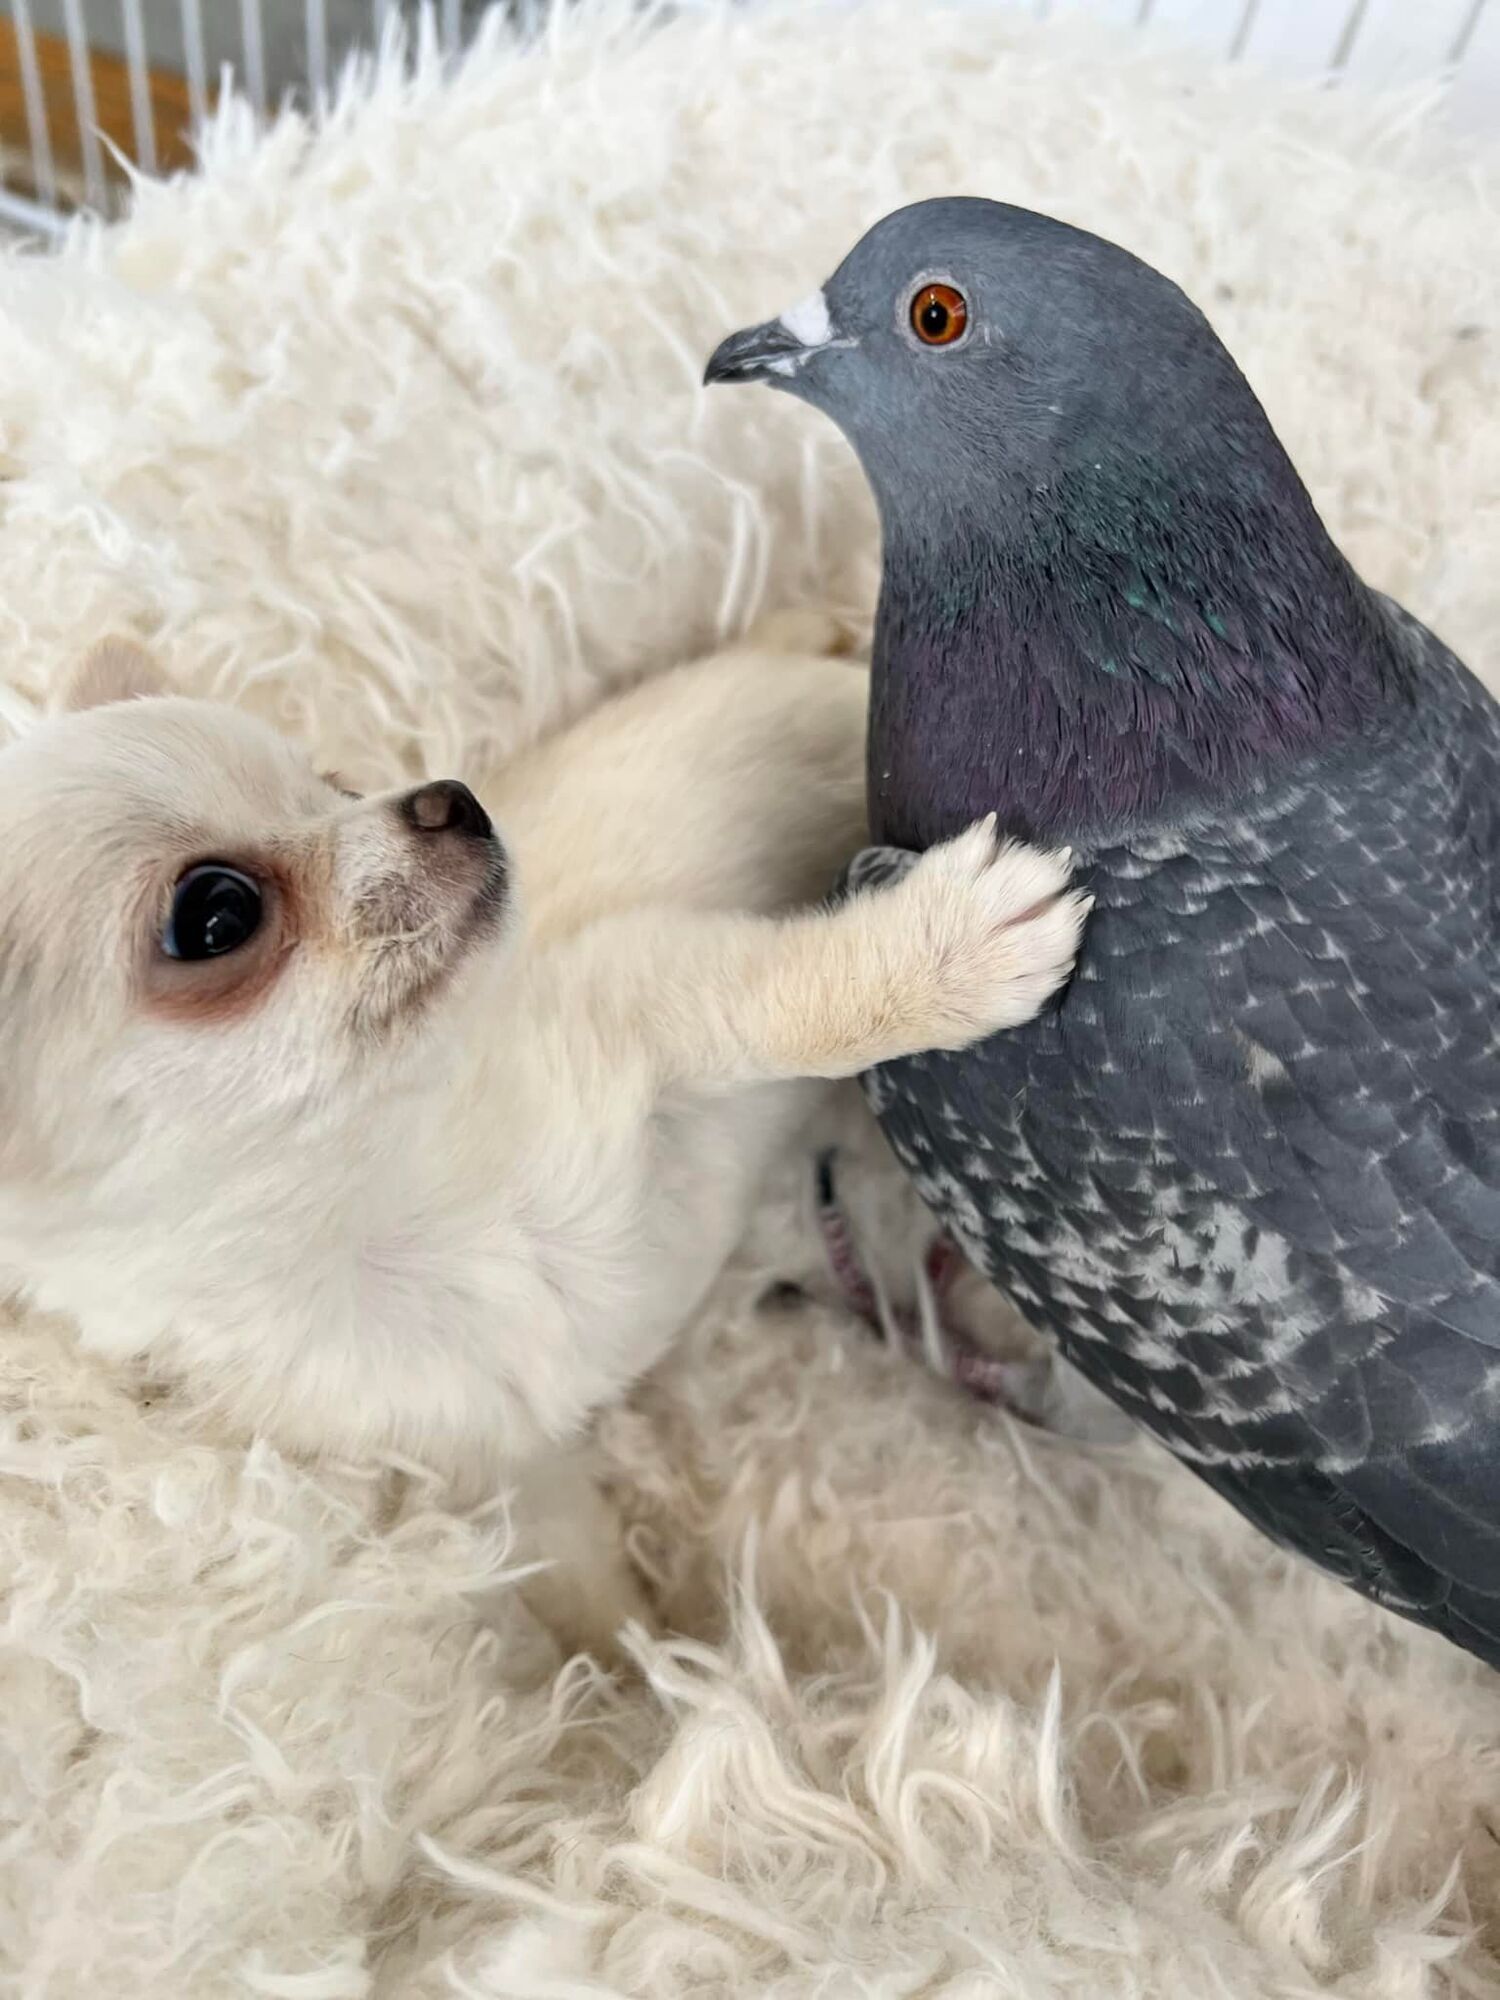 A pigeon that can't fly makes friends with a puppy that can't walk (cute photos)